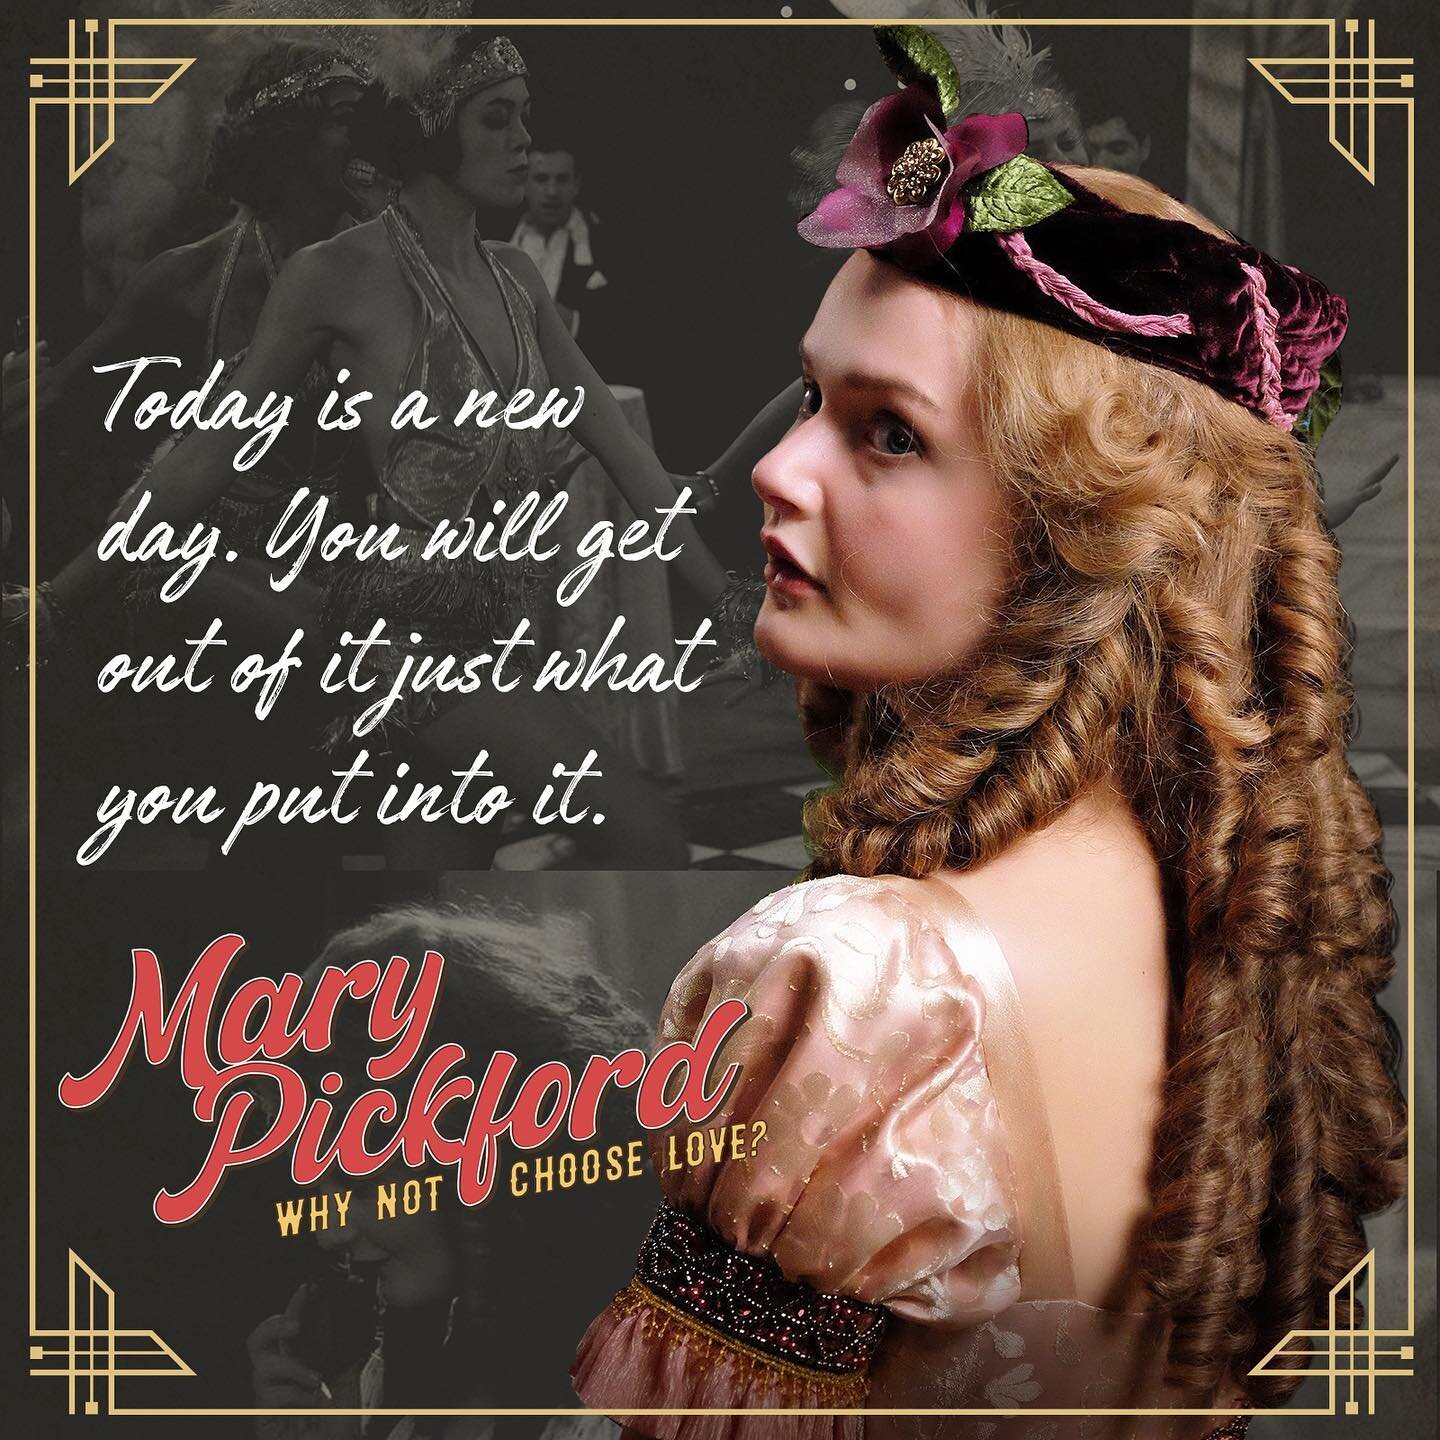 Quote from Mary Pickford, subject of the film &ldquo;Why Not Choose Love? A Mary Pickford Manifesto&rdquo; directed by @jennifer.delia. 

If you want to see more of Jennifer's work check out @humanizingtheicon page for chats with visionaries. 

Write